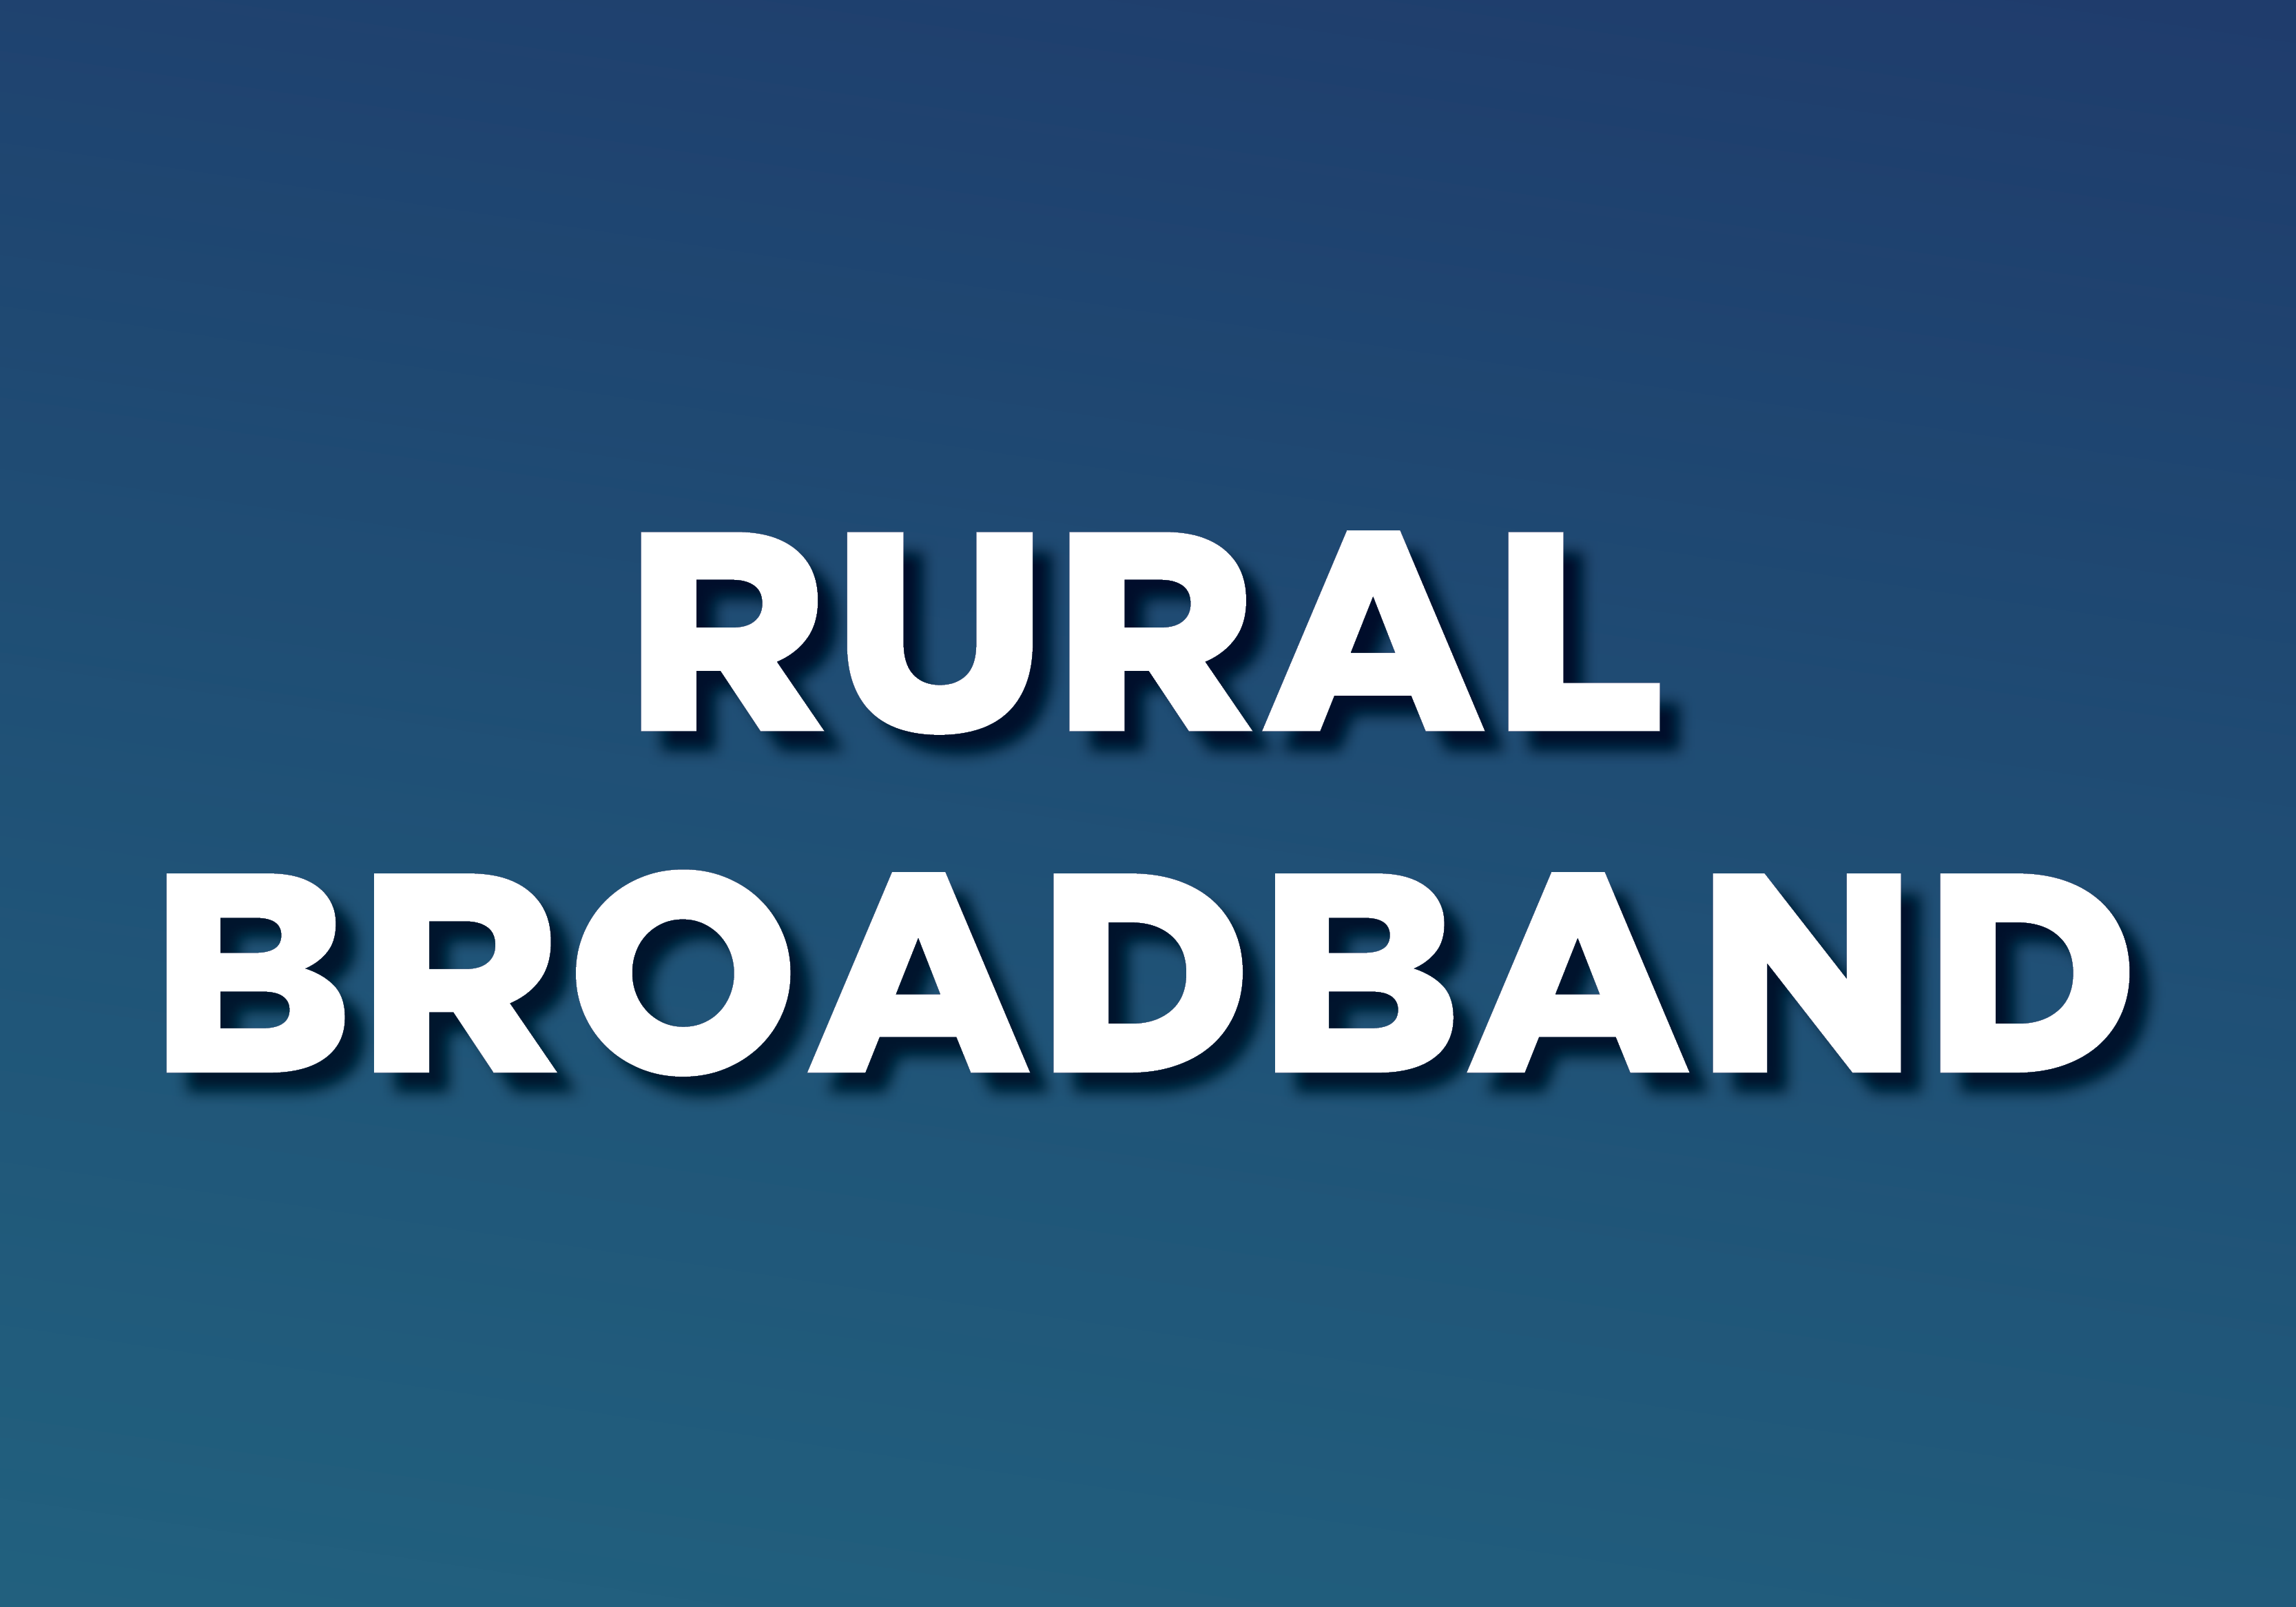 Thumbnail for Regional and Rural Broadband project 